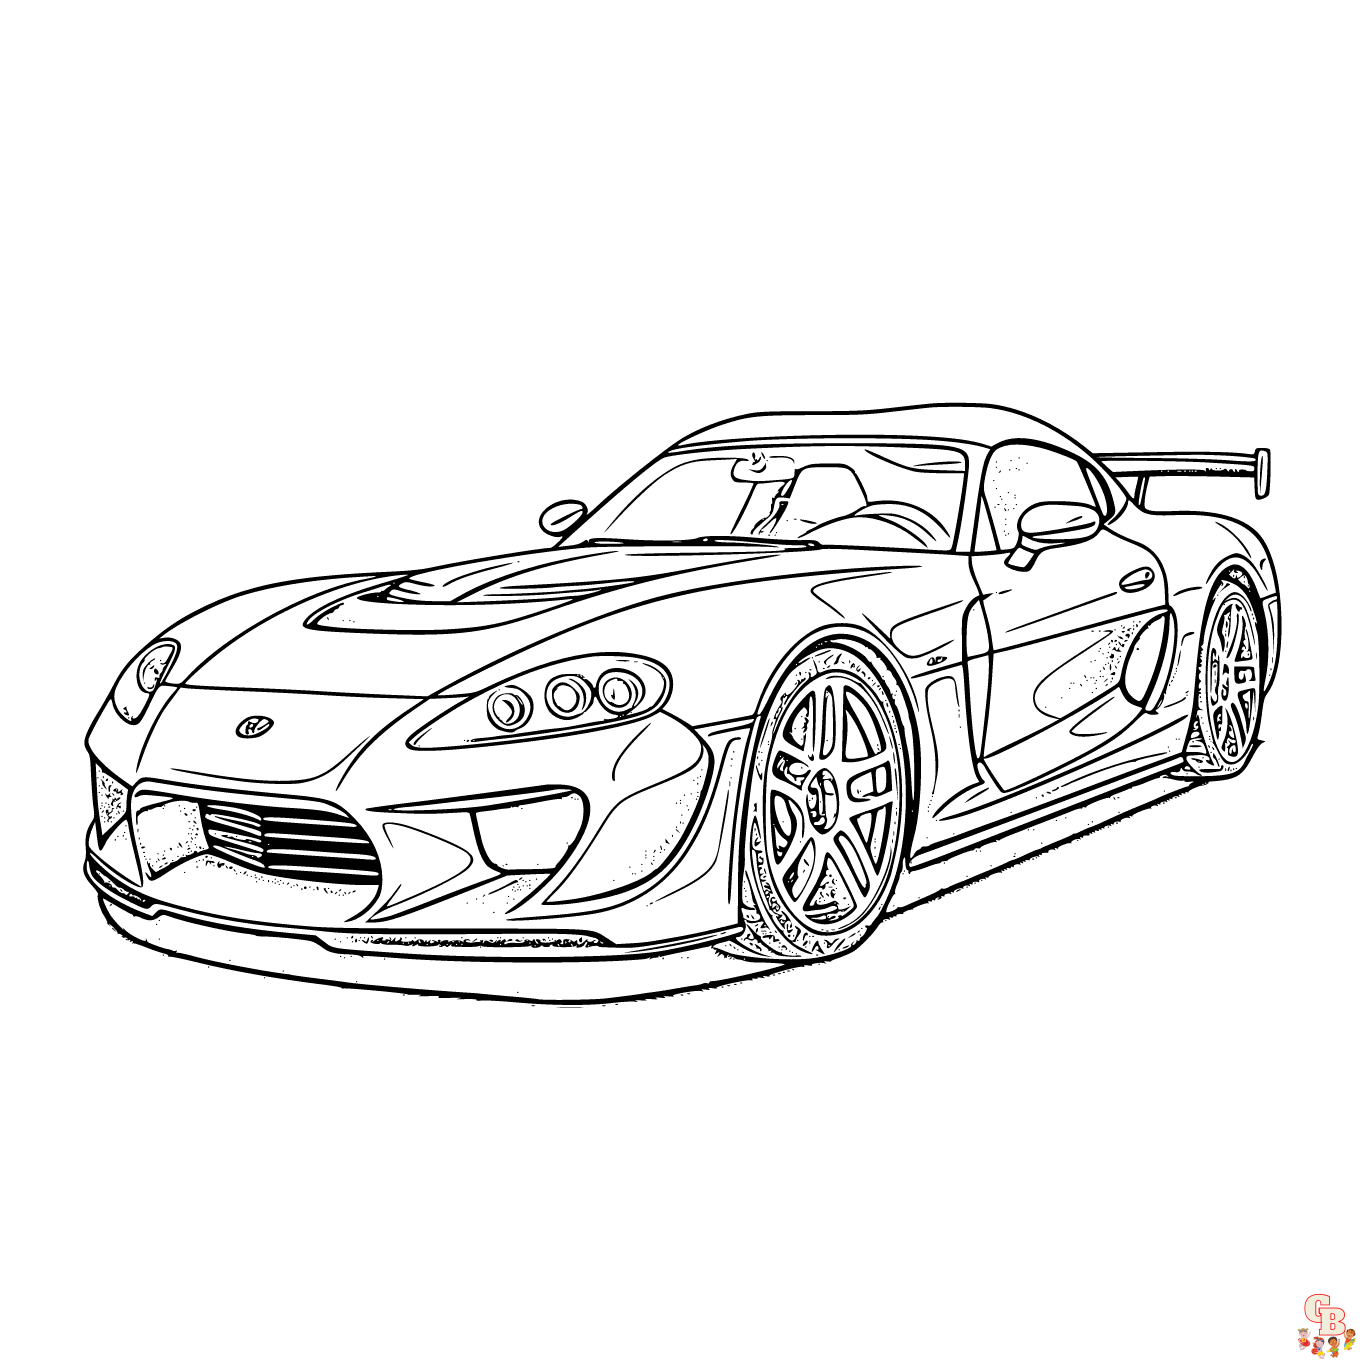 Printable supra coloring pages free for kids and adults